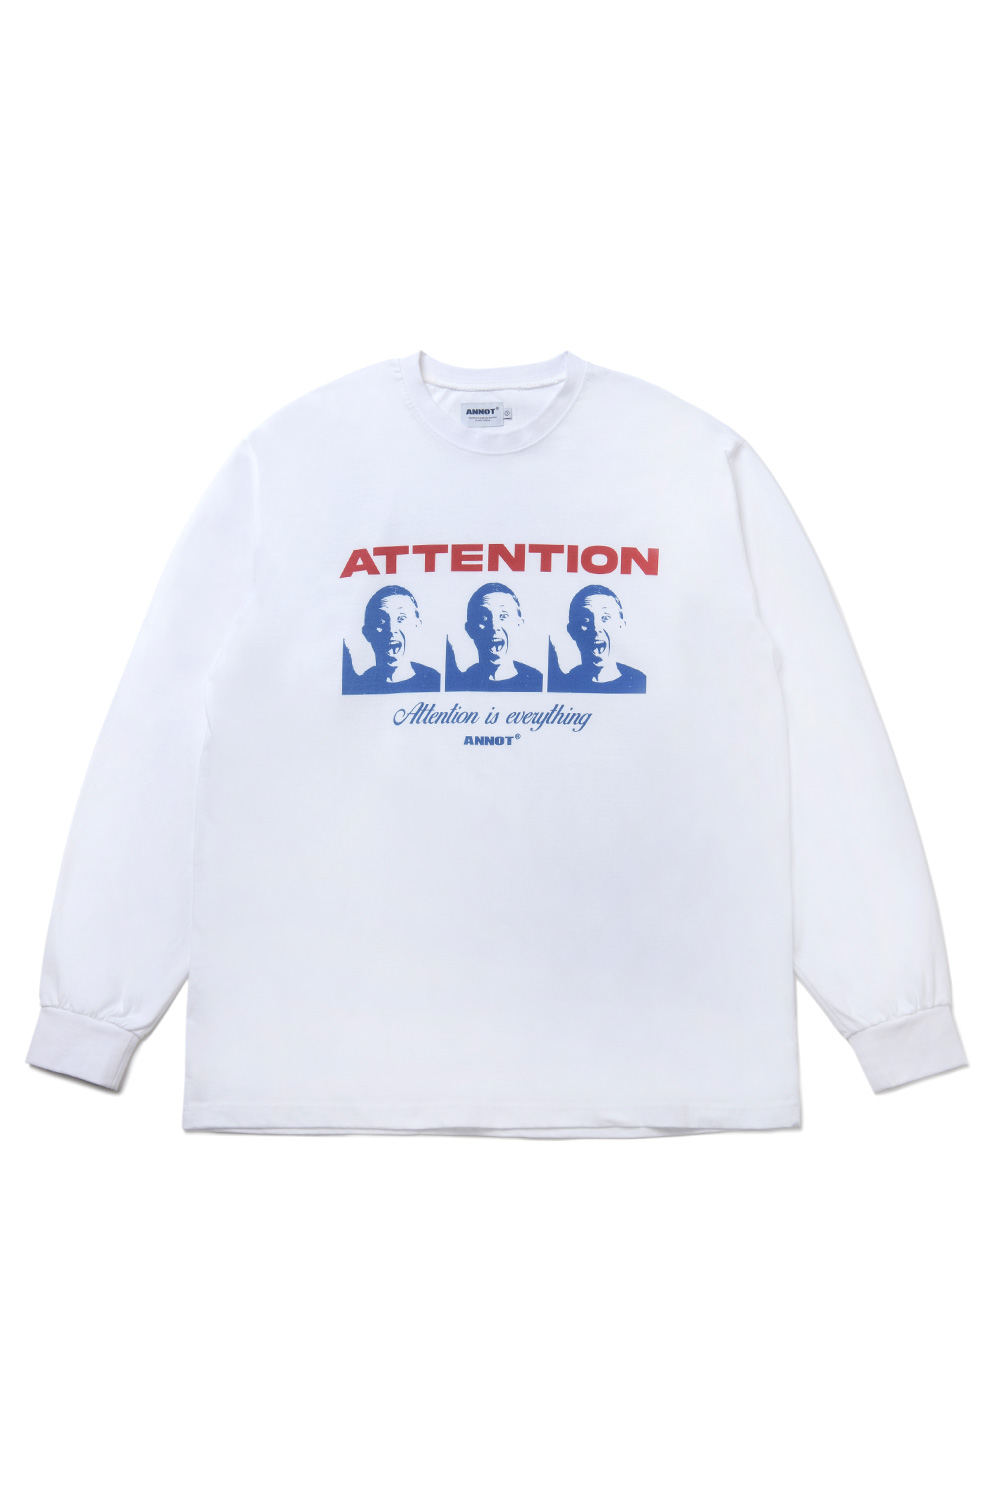 Attention Long Sleeve White